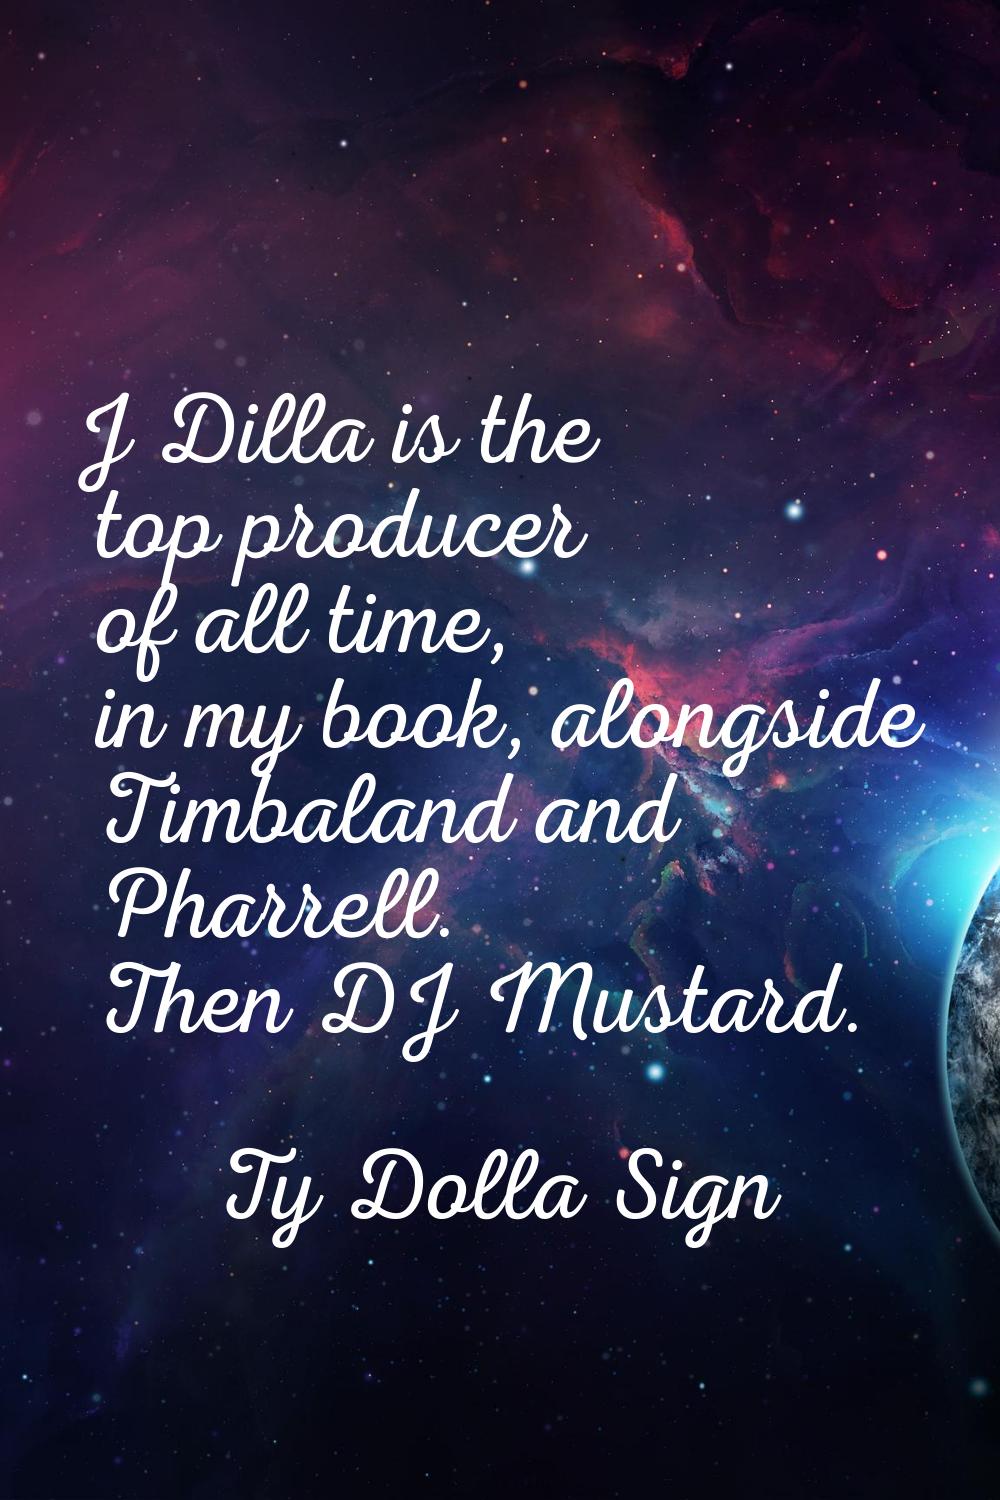 J Dilla is the top producer of all time, in my book, alongside Timbaland and Pharrell. Then DJ Must